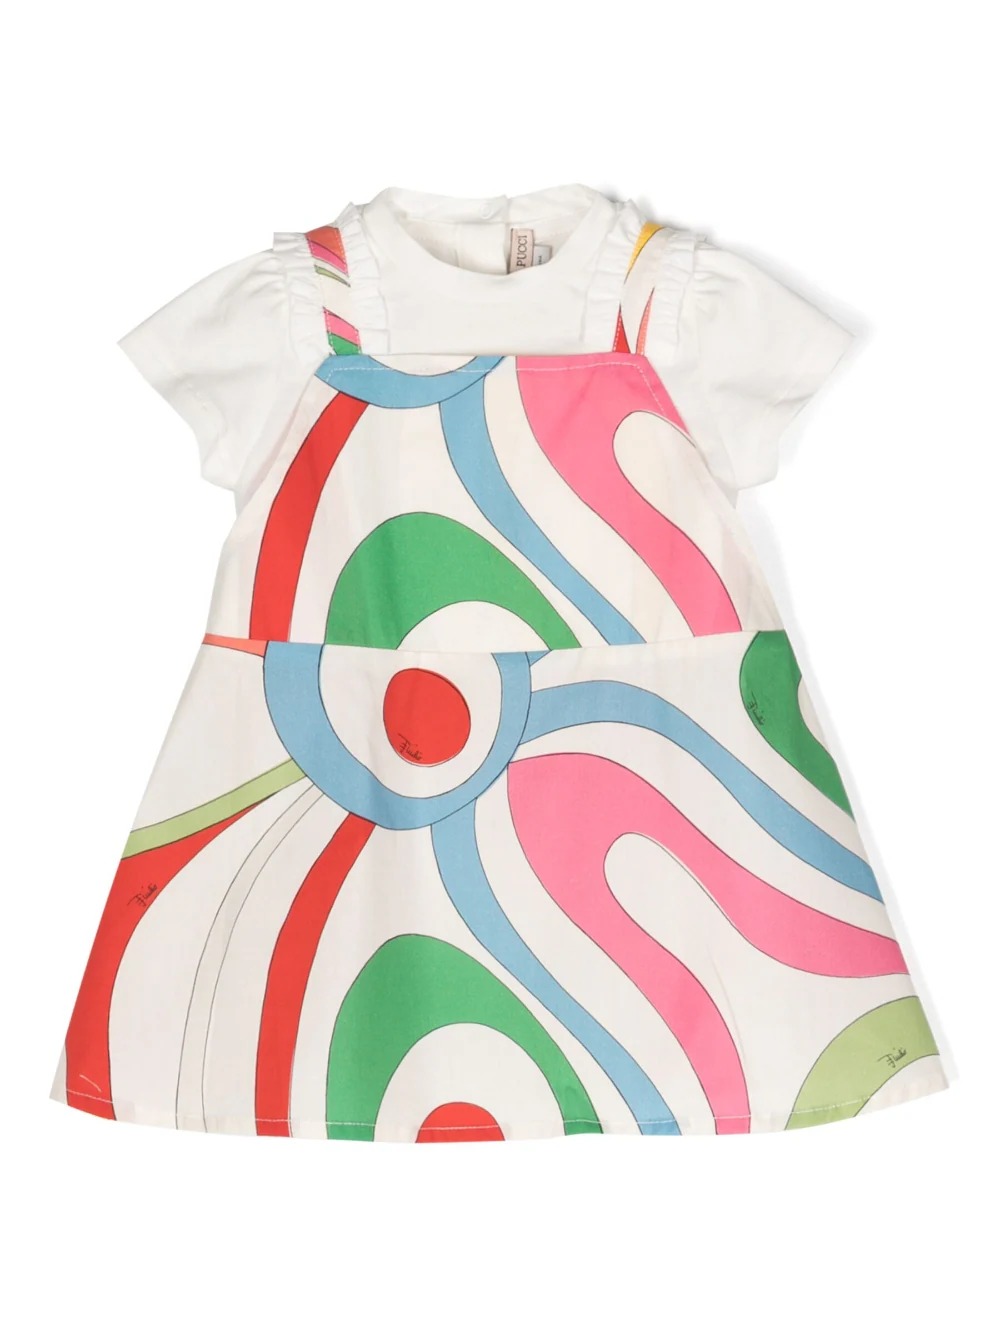 White Short-Sleeved Dress With Marble Print - EMILIO PUCCI JUNIOR